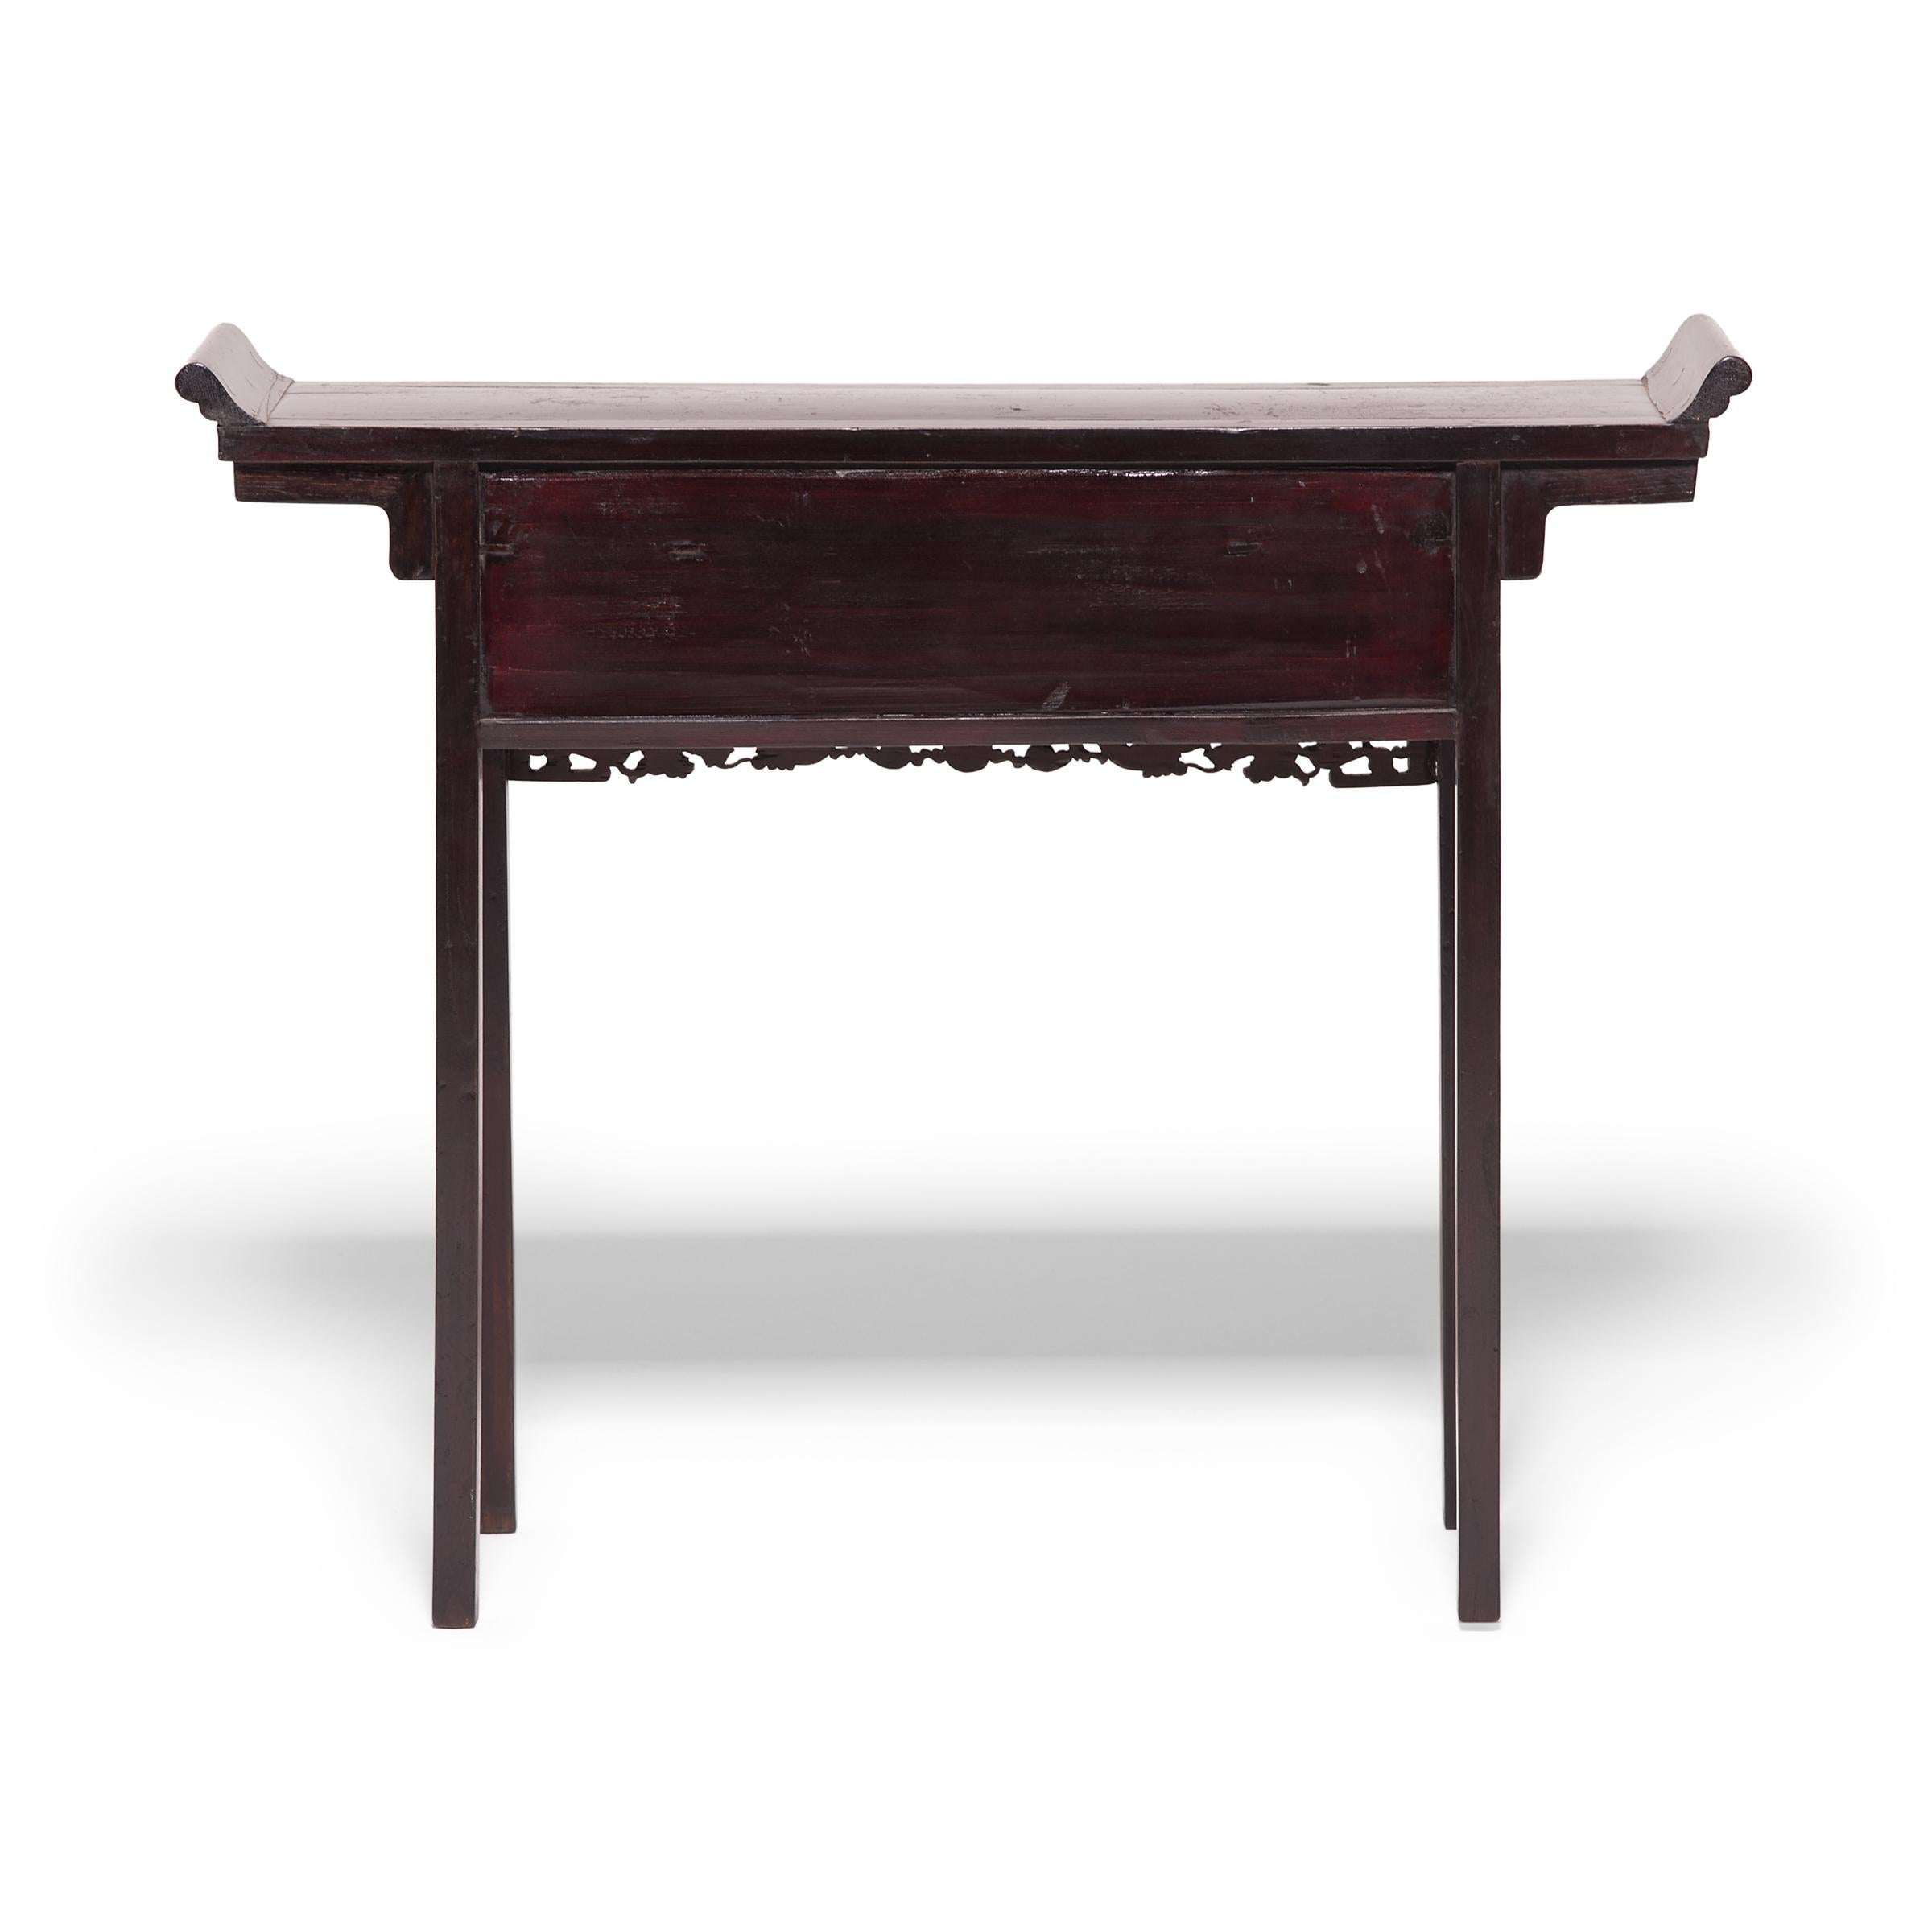 Chinese Petite Console Table with Dancing Dragon Apron